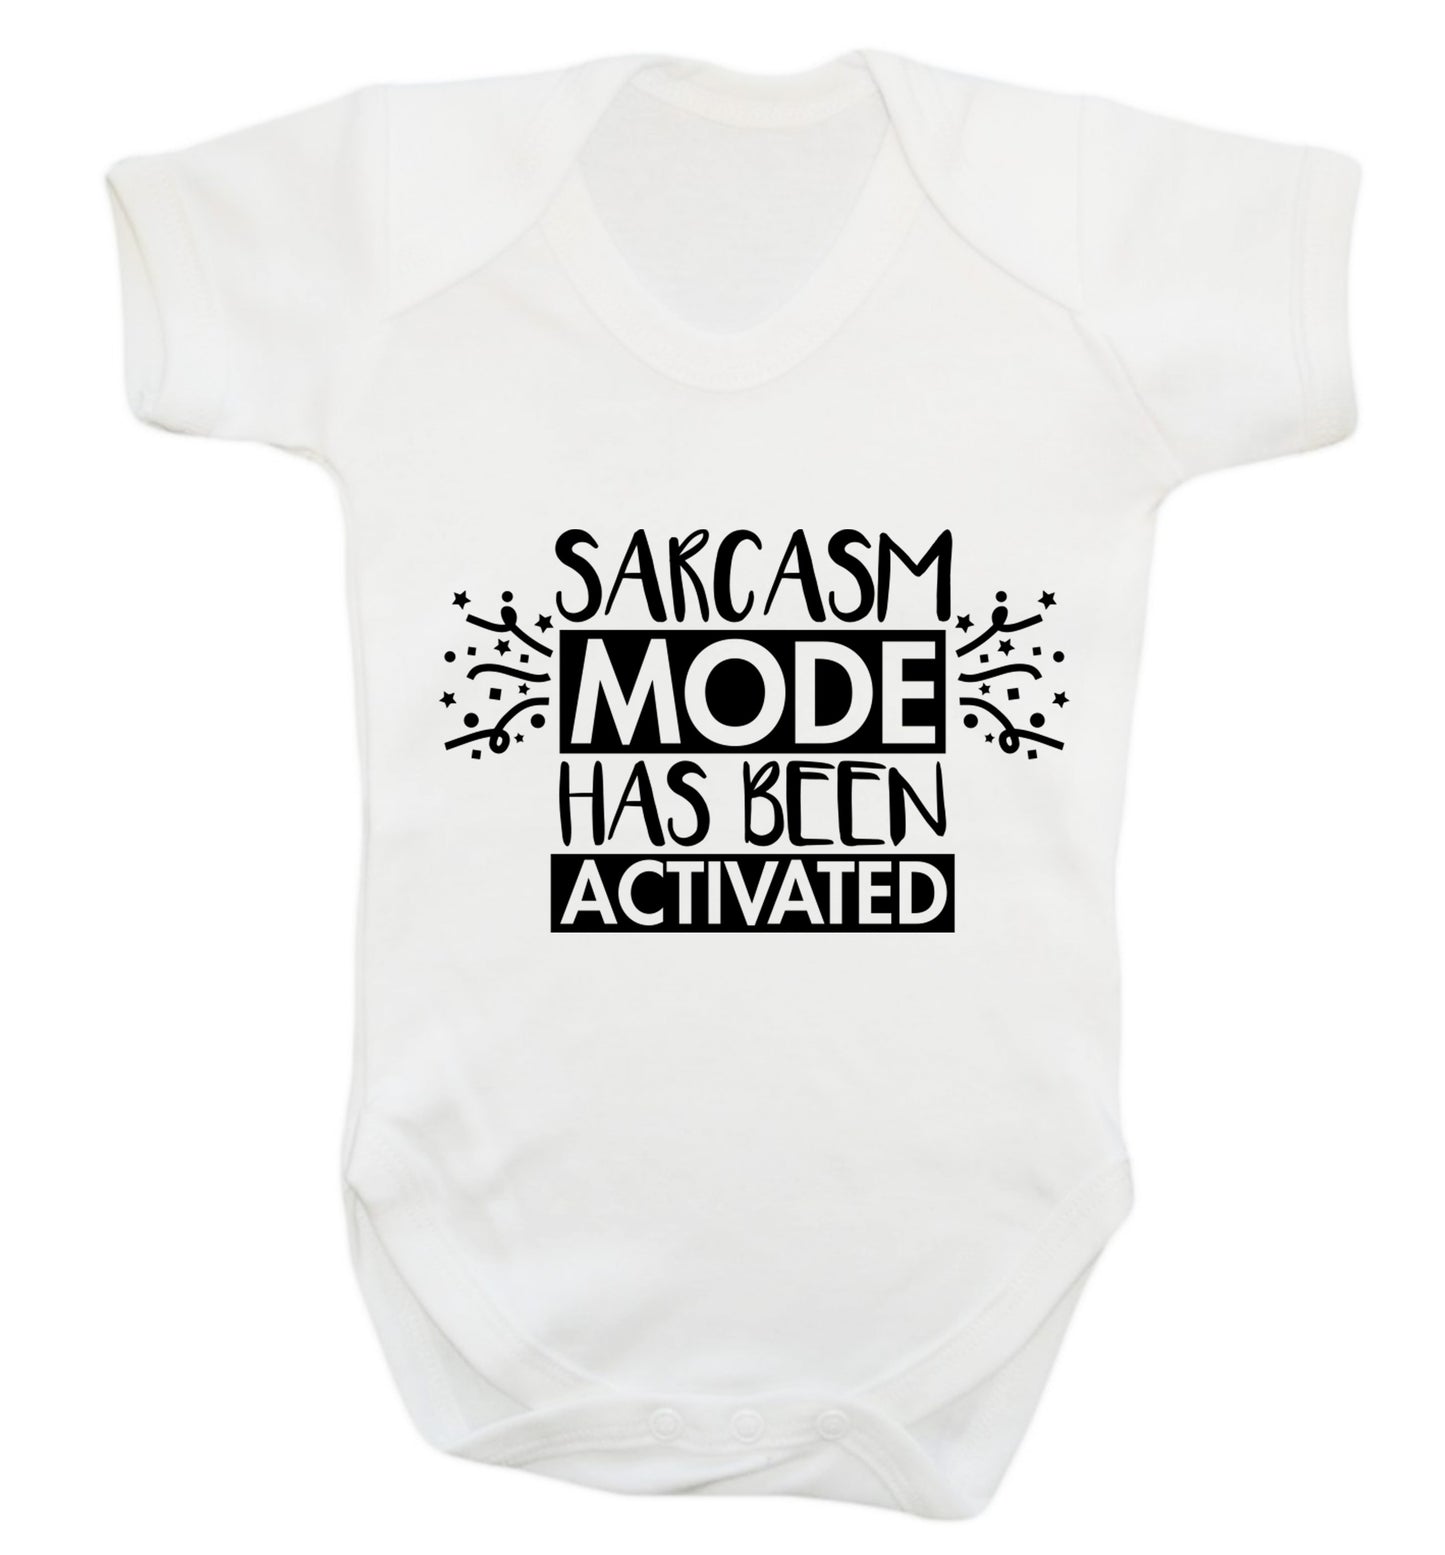 Sarcarsm mode has been activated Baby Vest white 18-24 months